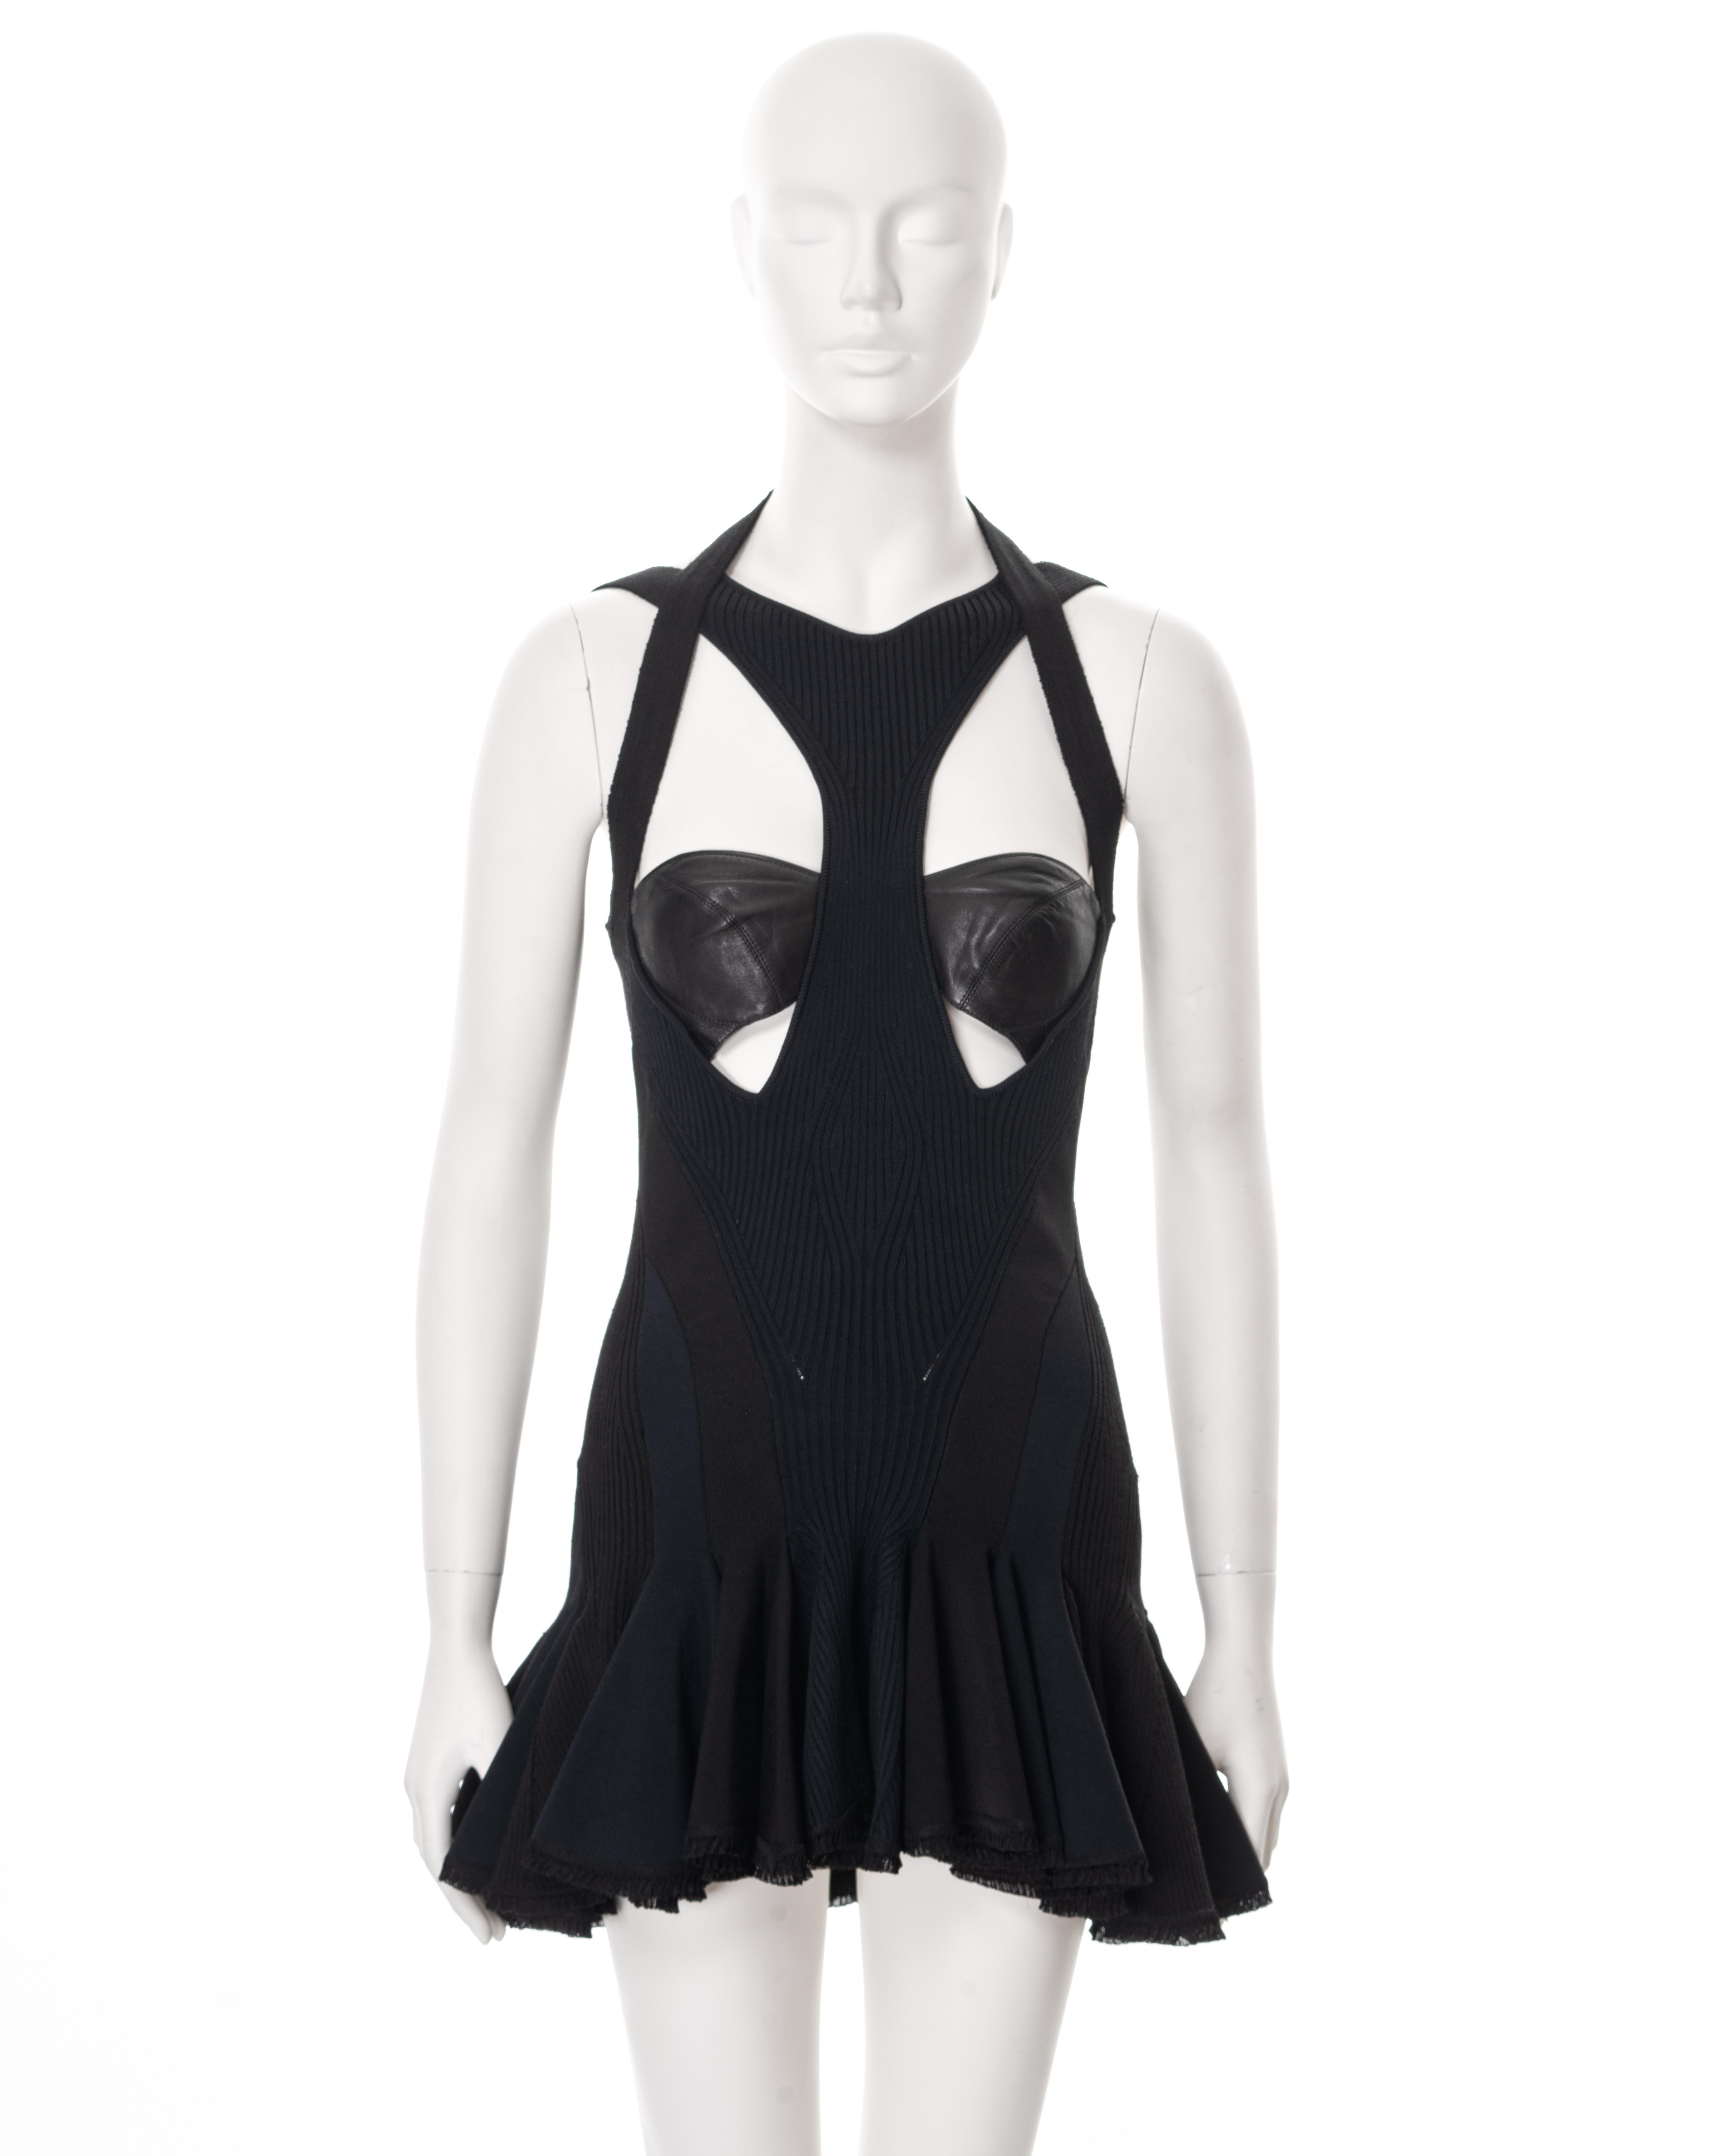 ▪ Alexander McQueen mini dress 
▪ Sold by One of a Kind Archive
▪ Spring-Summer 2004 
▪ Constructed from black rib knit, spandex jersey and leather 
▪ Built-in leather bustier 
▪ Multiple criss-cross shoulder straps 
▪ Gored graduated mini skirt
▪